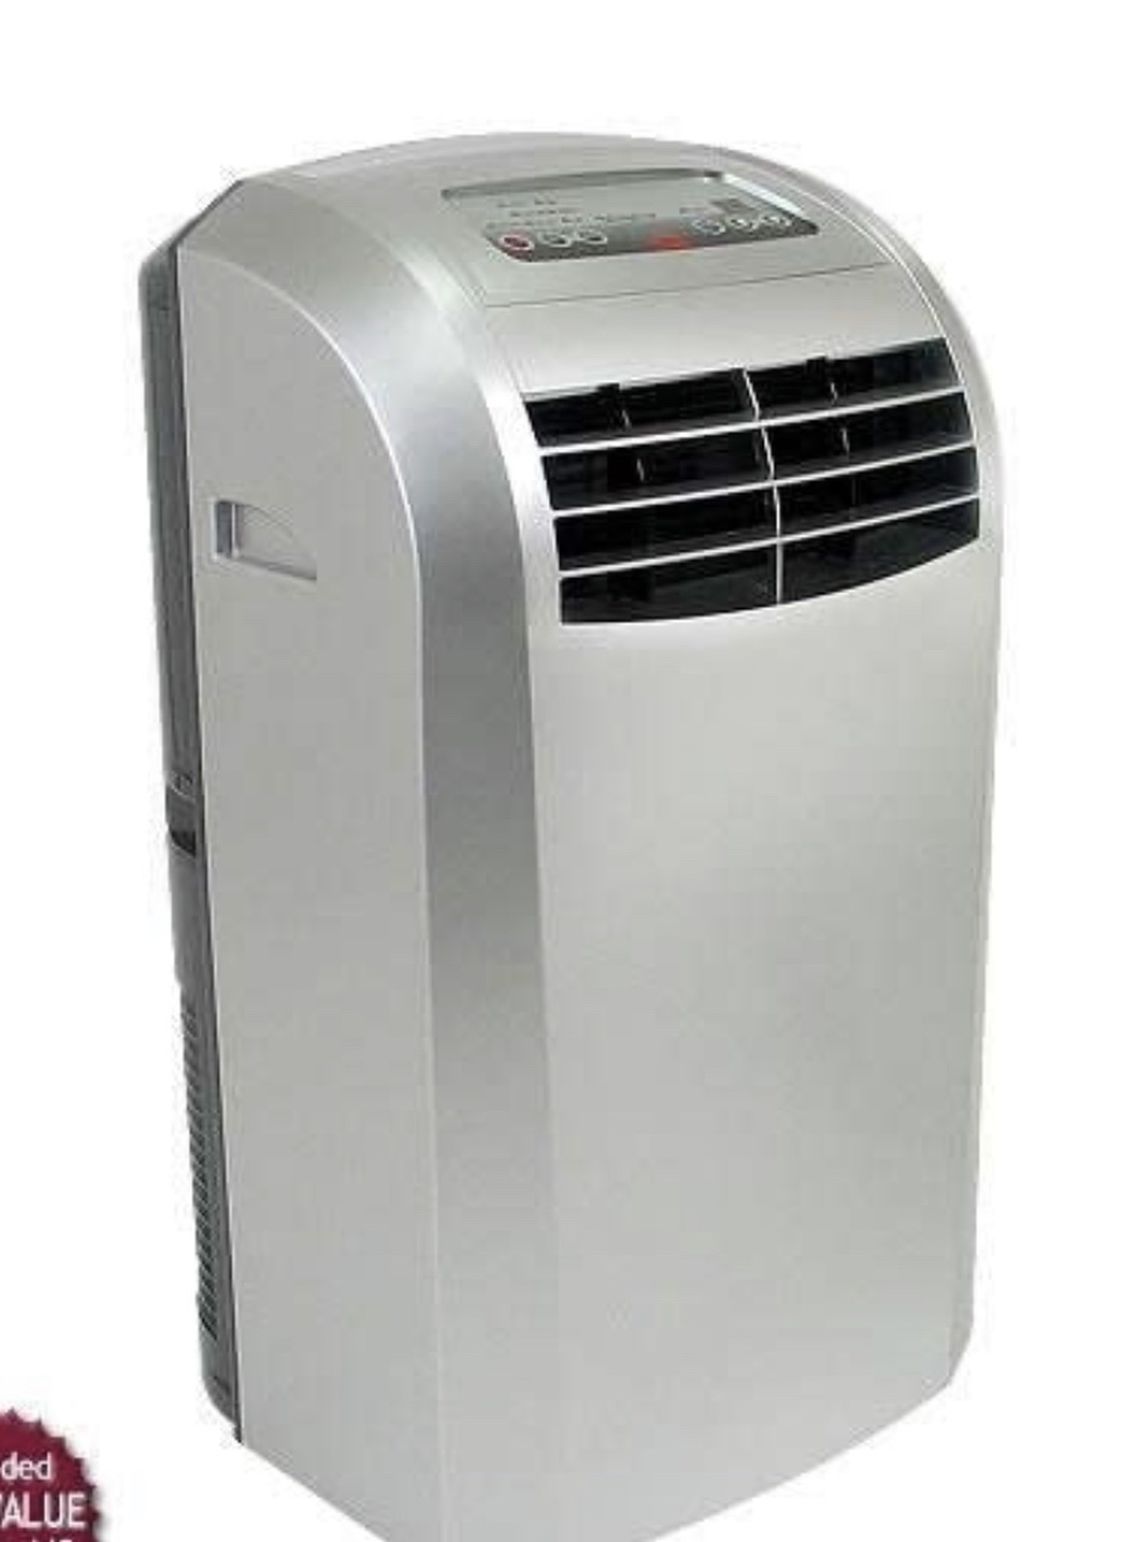 EdgeStar AP12000S Portable Air Conditioner with Dehumidifier and Fan for Rooms up to 425 Sq. Ft. with Remote Control